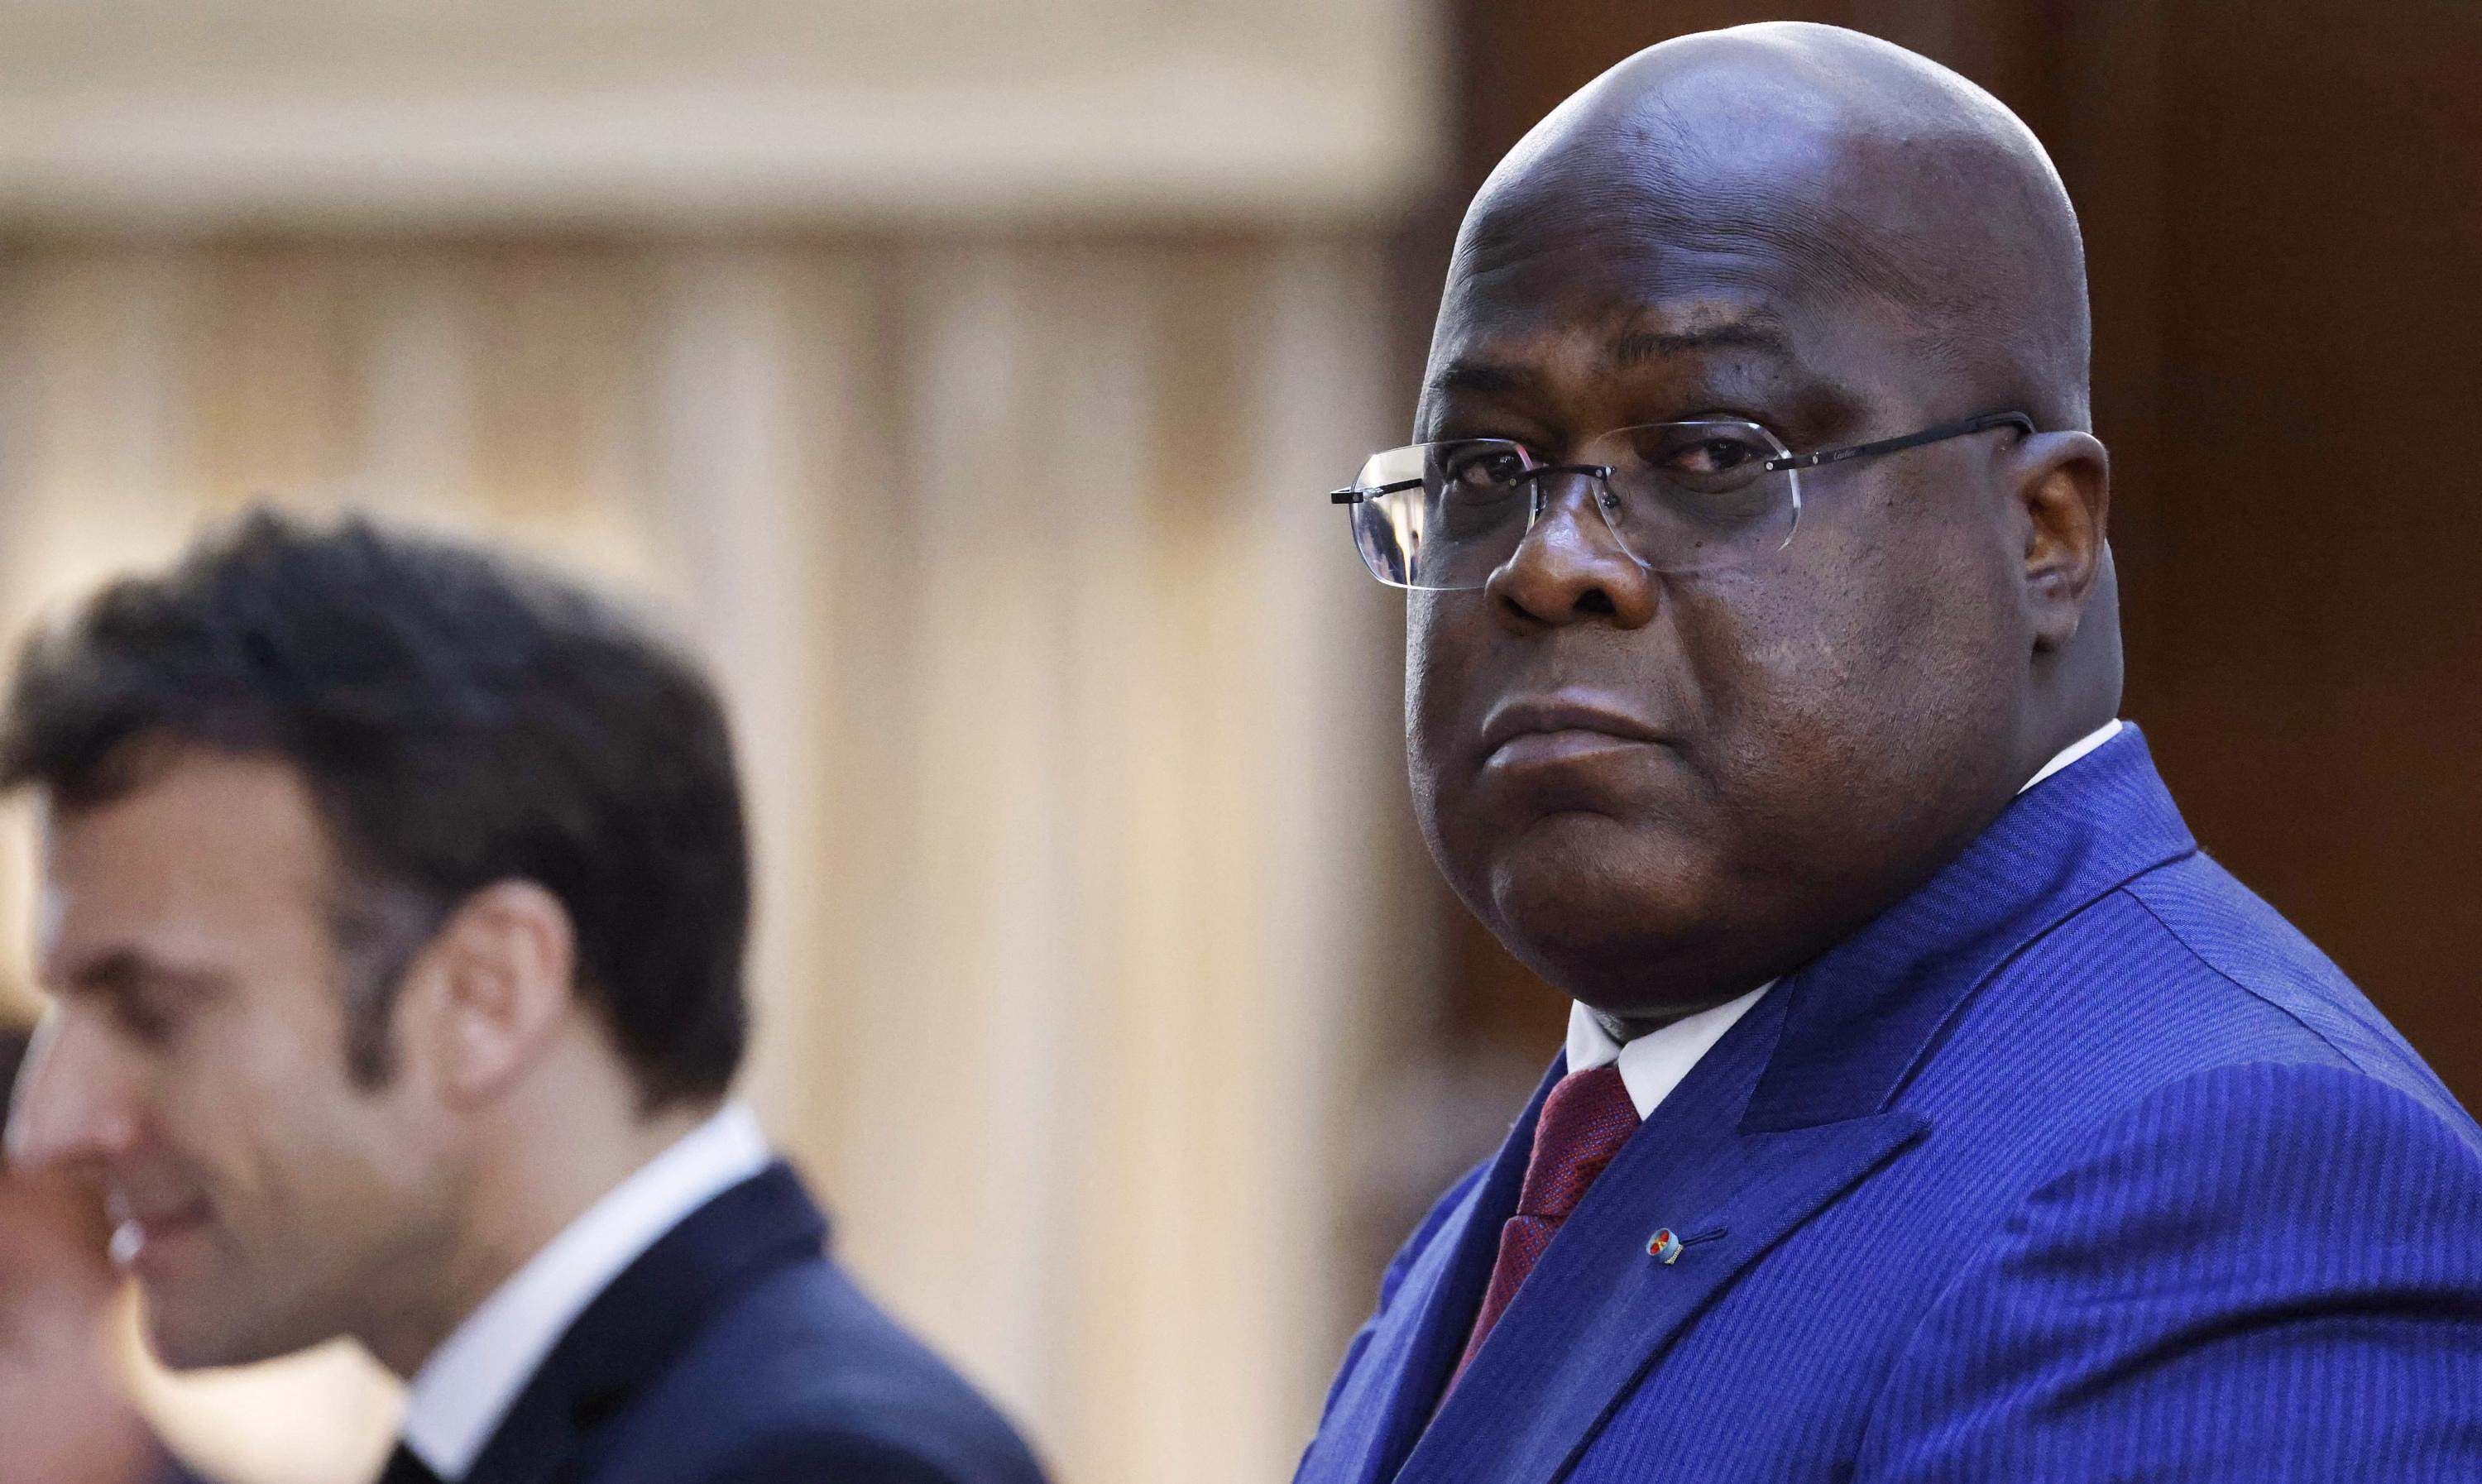 Why the President of the Democratic Republic of Congo is visiting France